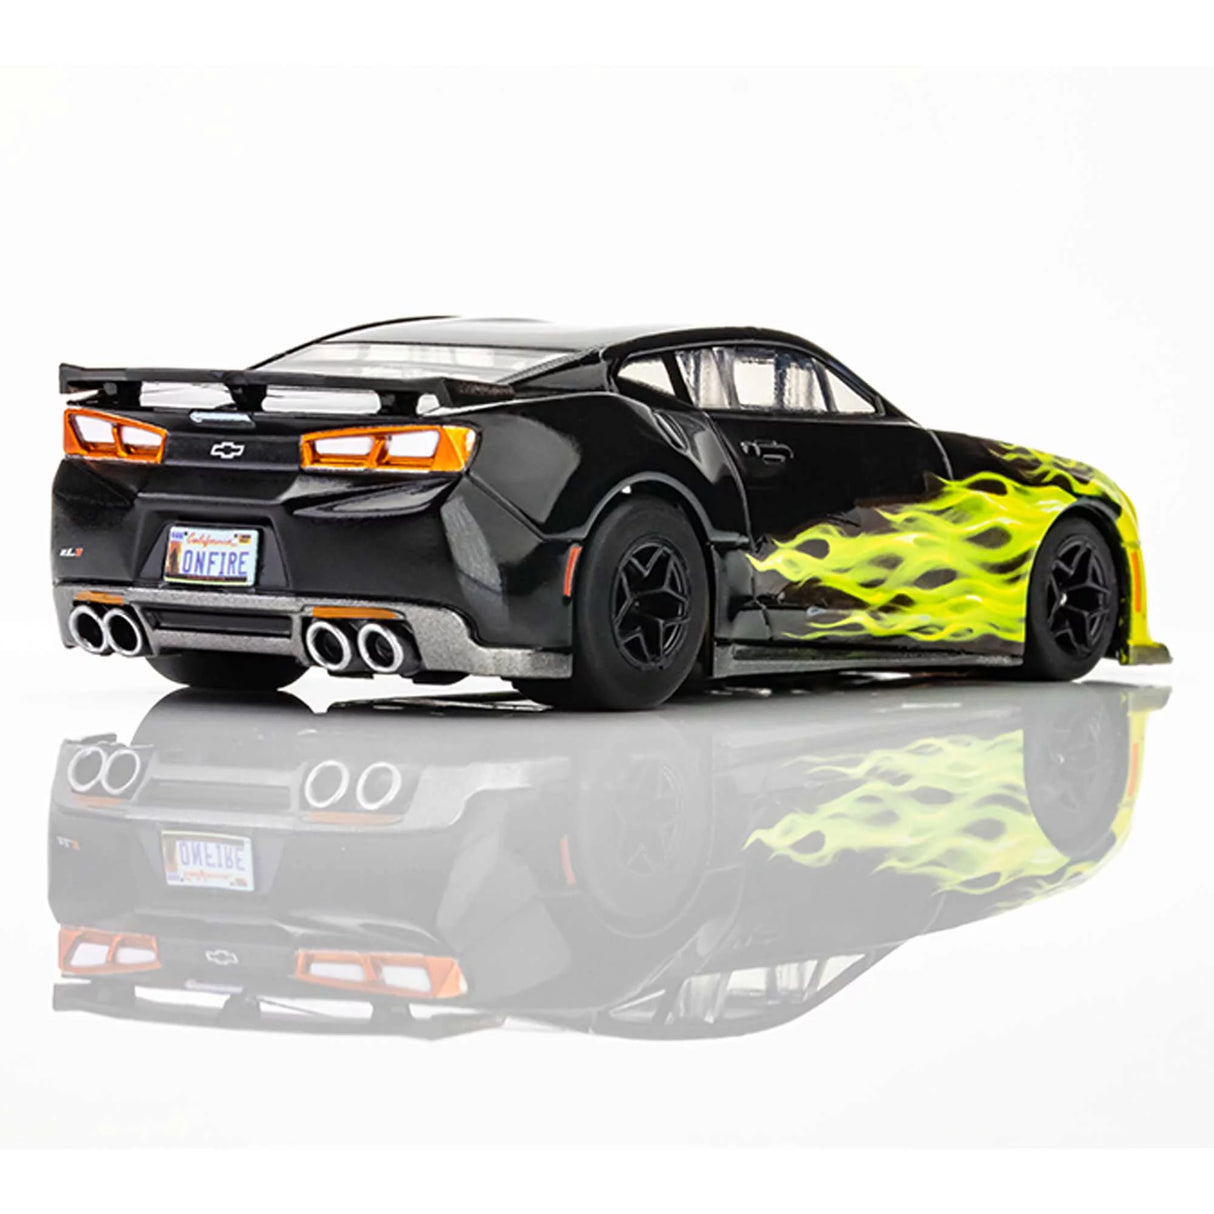 Sleek black Camaro ZL1 slot car with vibrant lime green flame decals, showcasing a powerful and dynamic racing design.